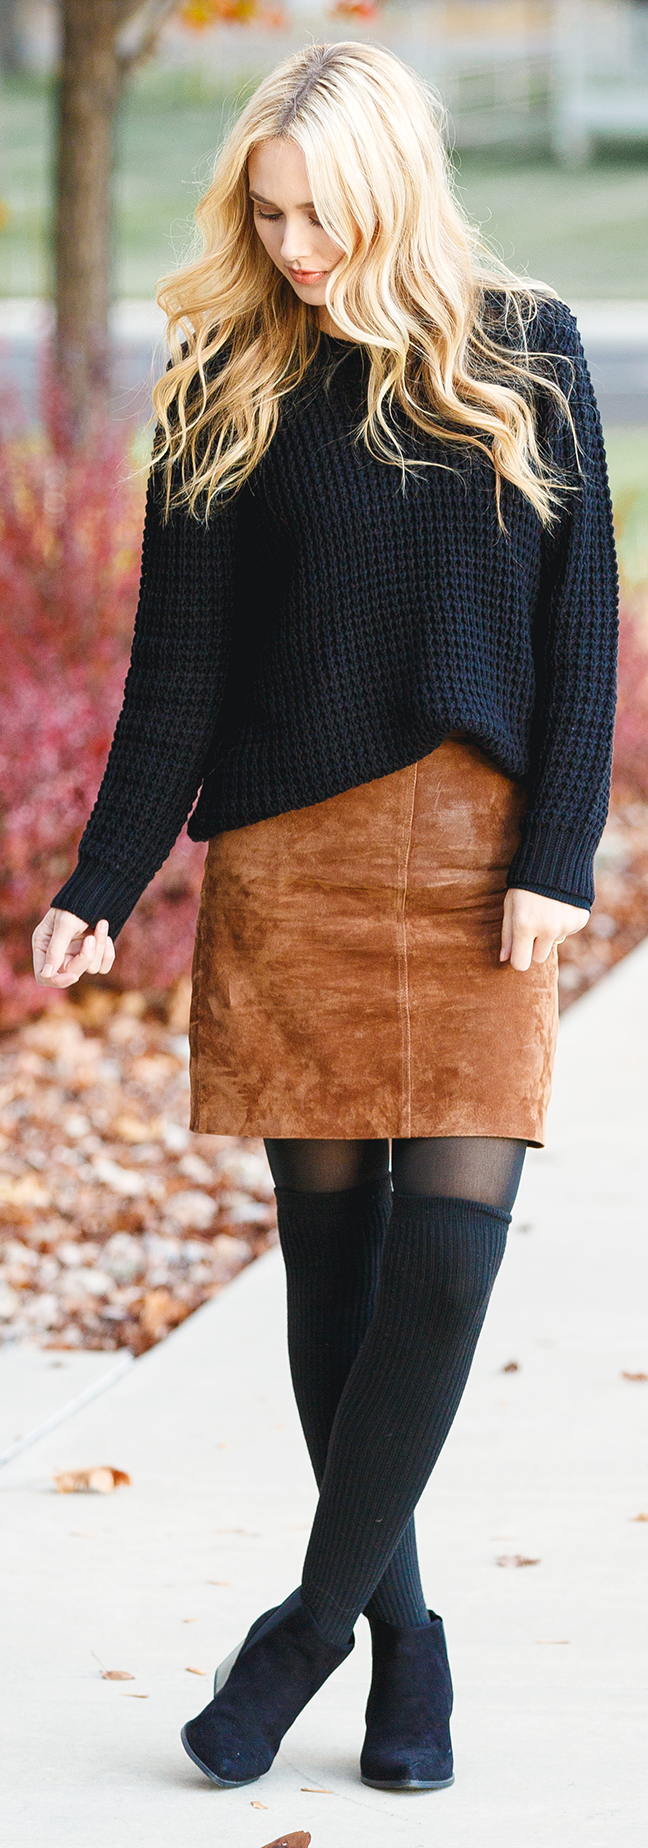 5 Ways to Stay Sane During Holidays - Blue Eyed Finch - Black sweater, camel suede skirt, okt tights and black booties